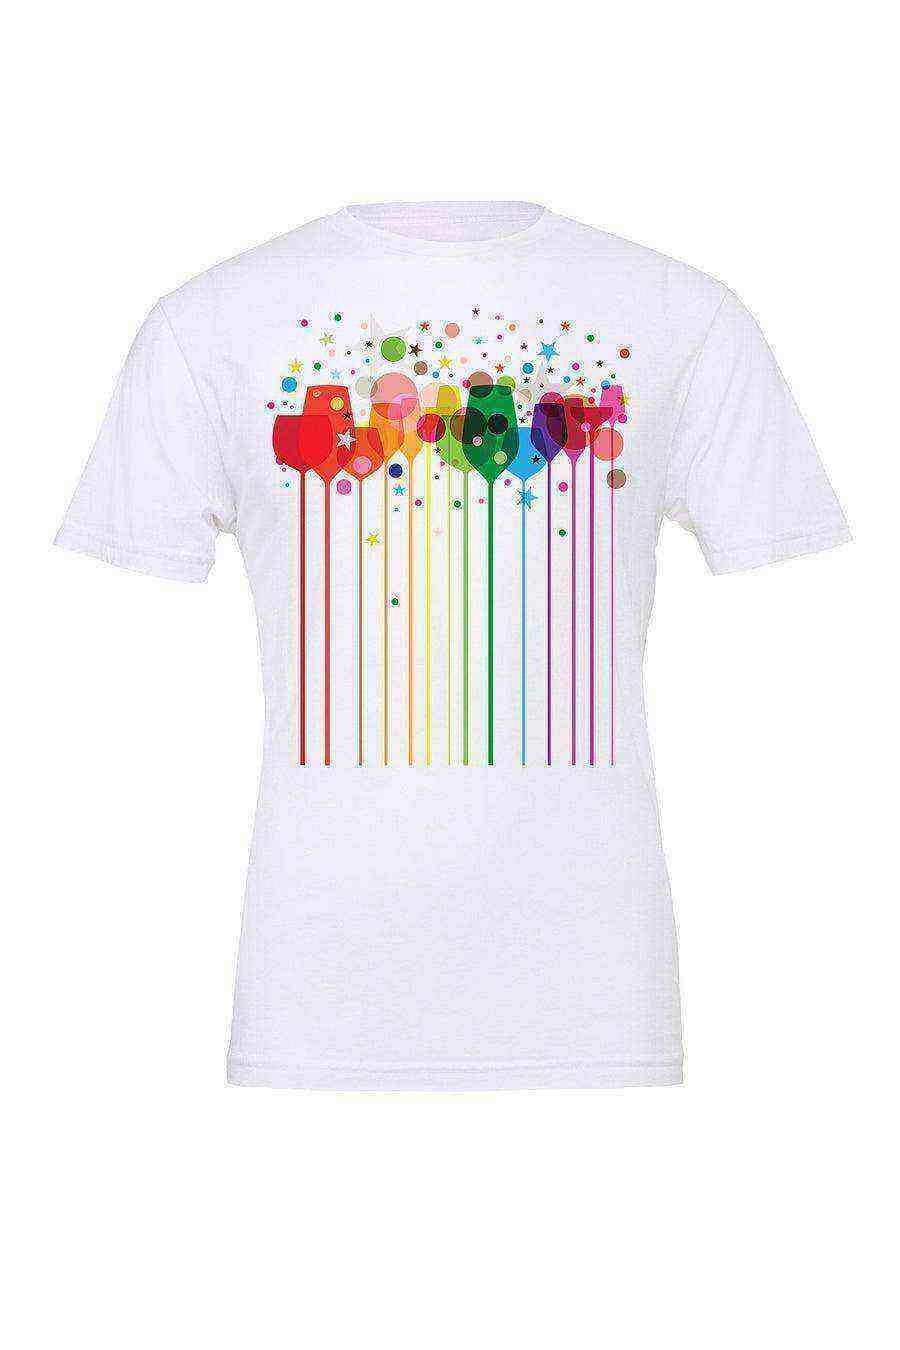 Toddler | Colorful Wine Glasses shirt | Wine Shirt | Wine Glasses - Dylan's Tees